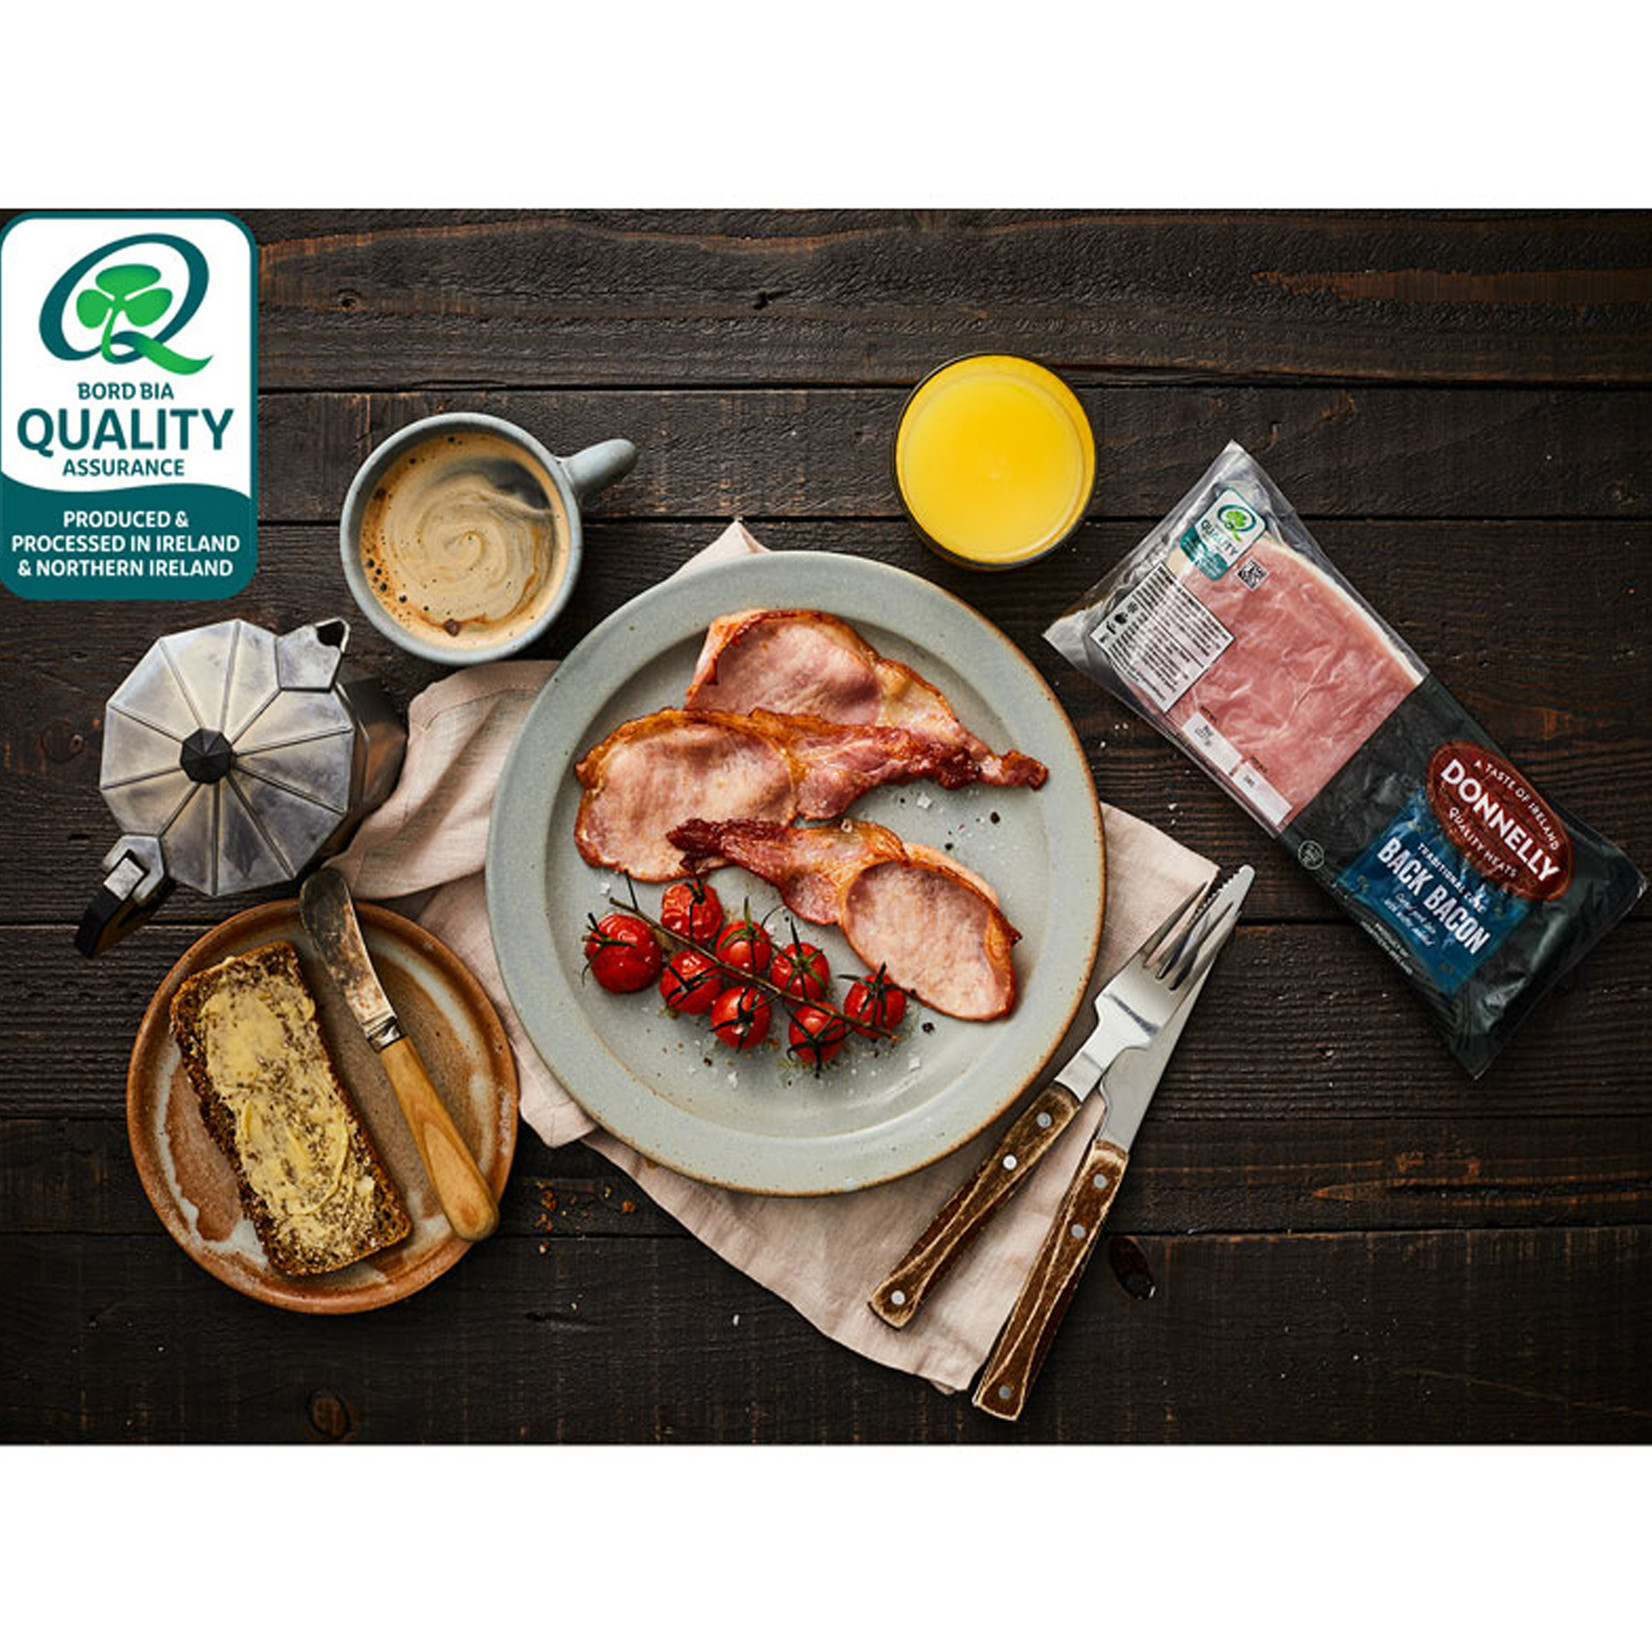 Donnelly Donnelly Irish Back Bacon 227g (8oz)